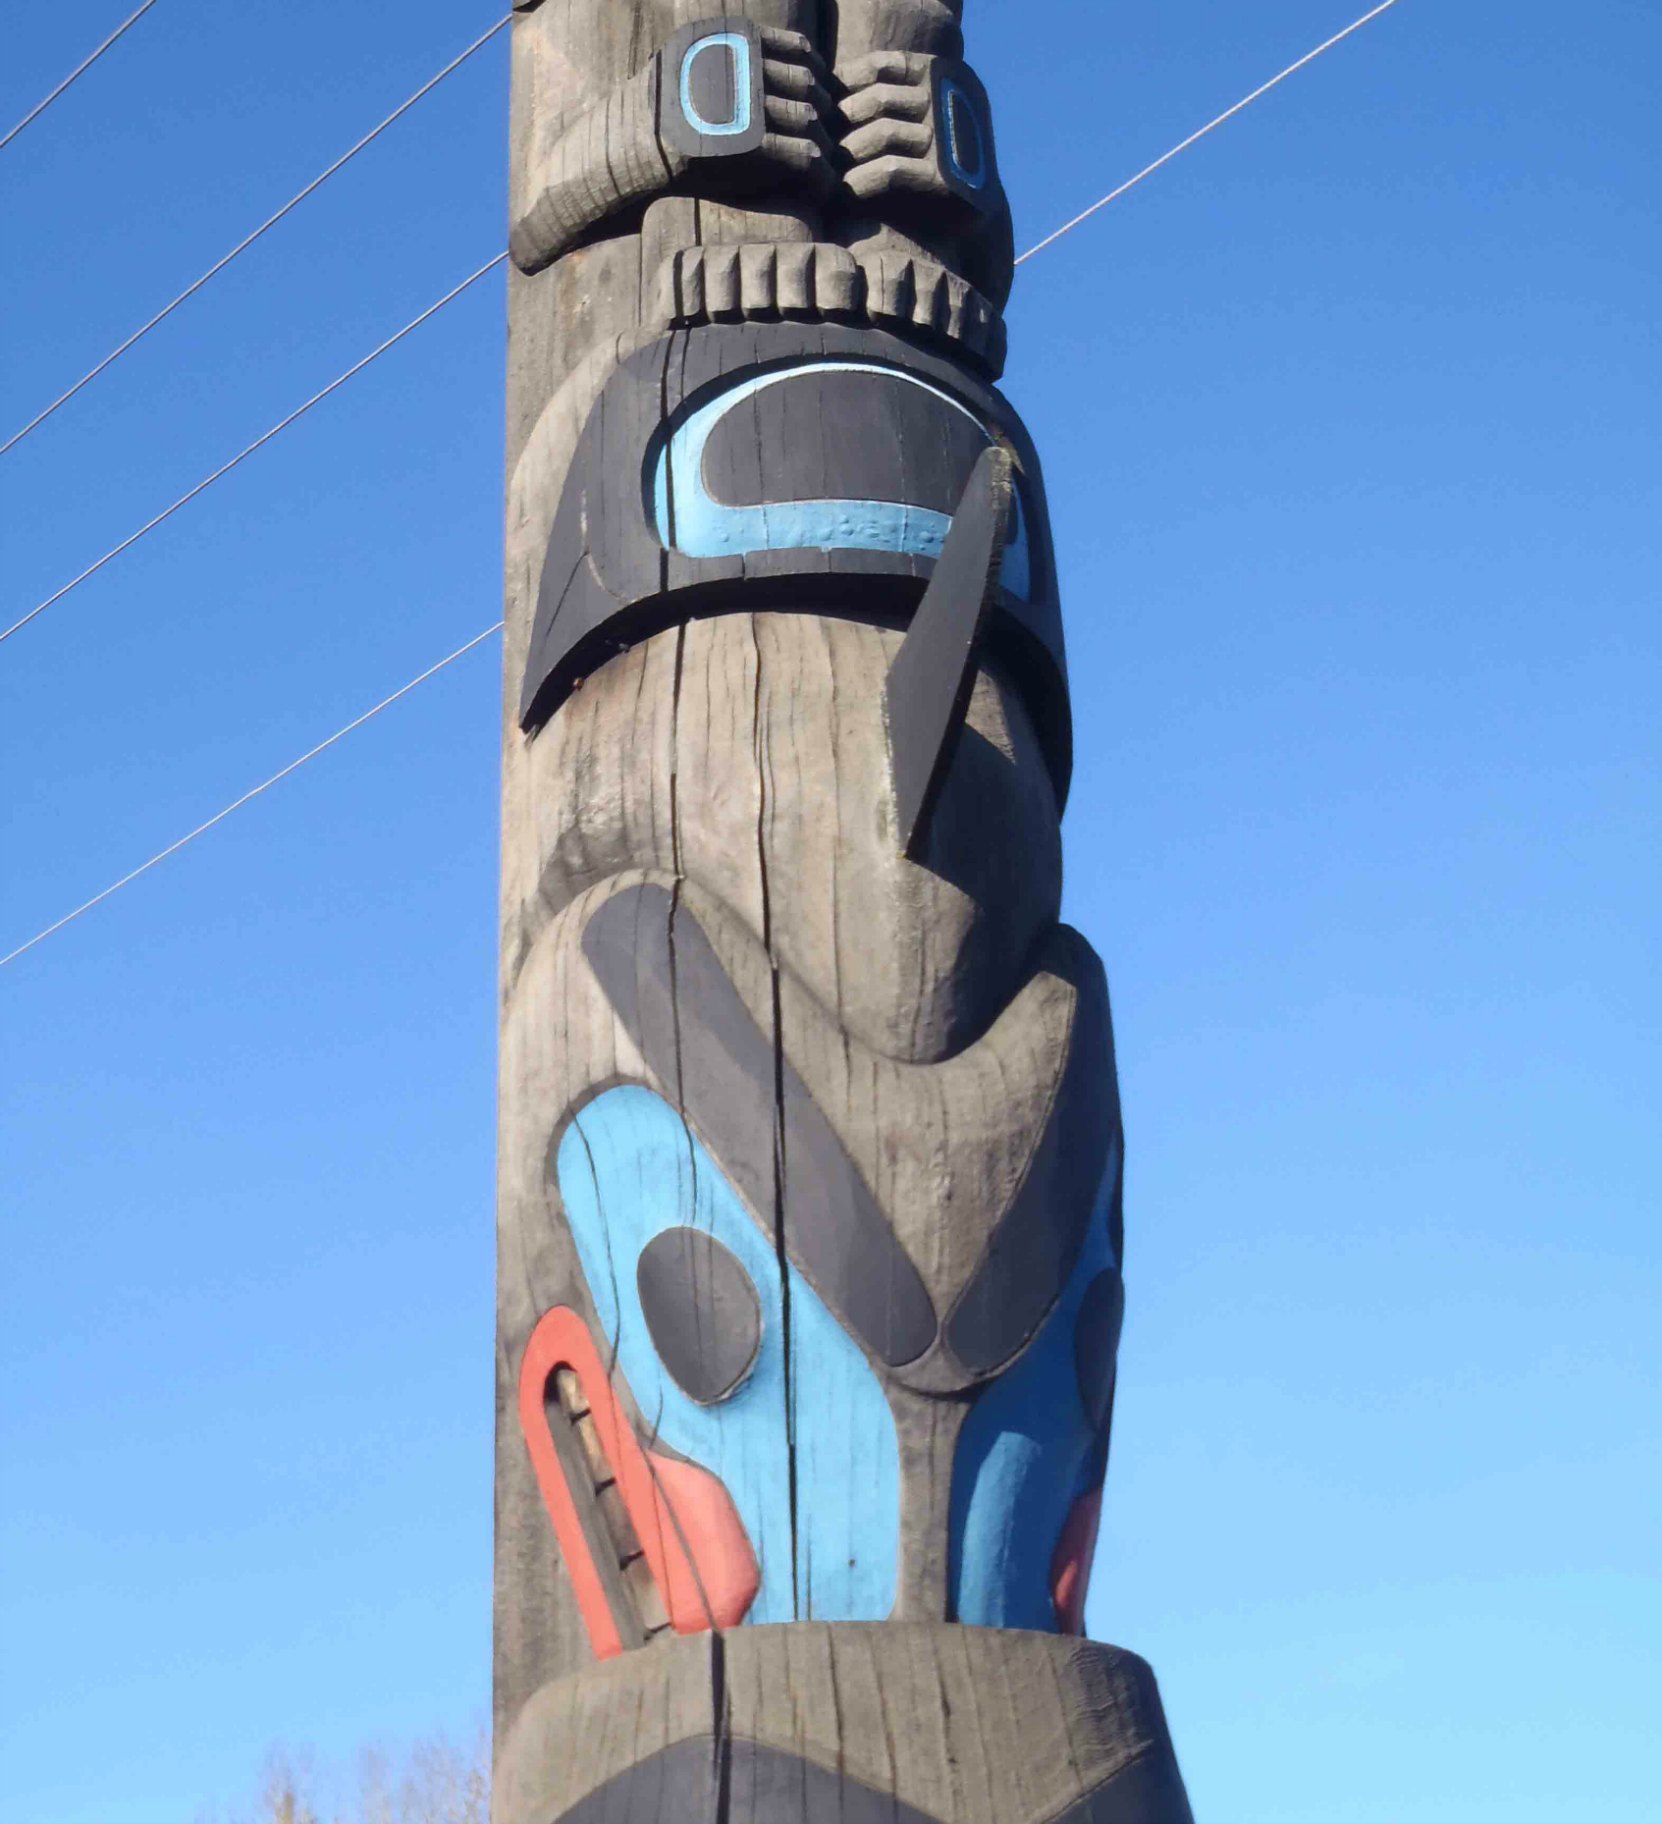 Chief's Pole, Killer Whale figure, Government Street at Kenneth Street, Duncan, B.C.